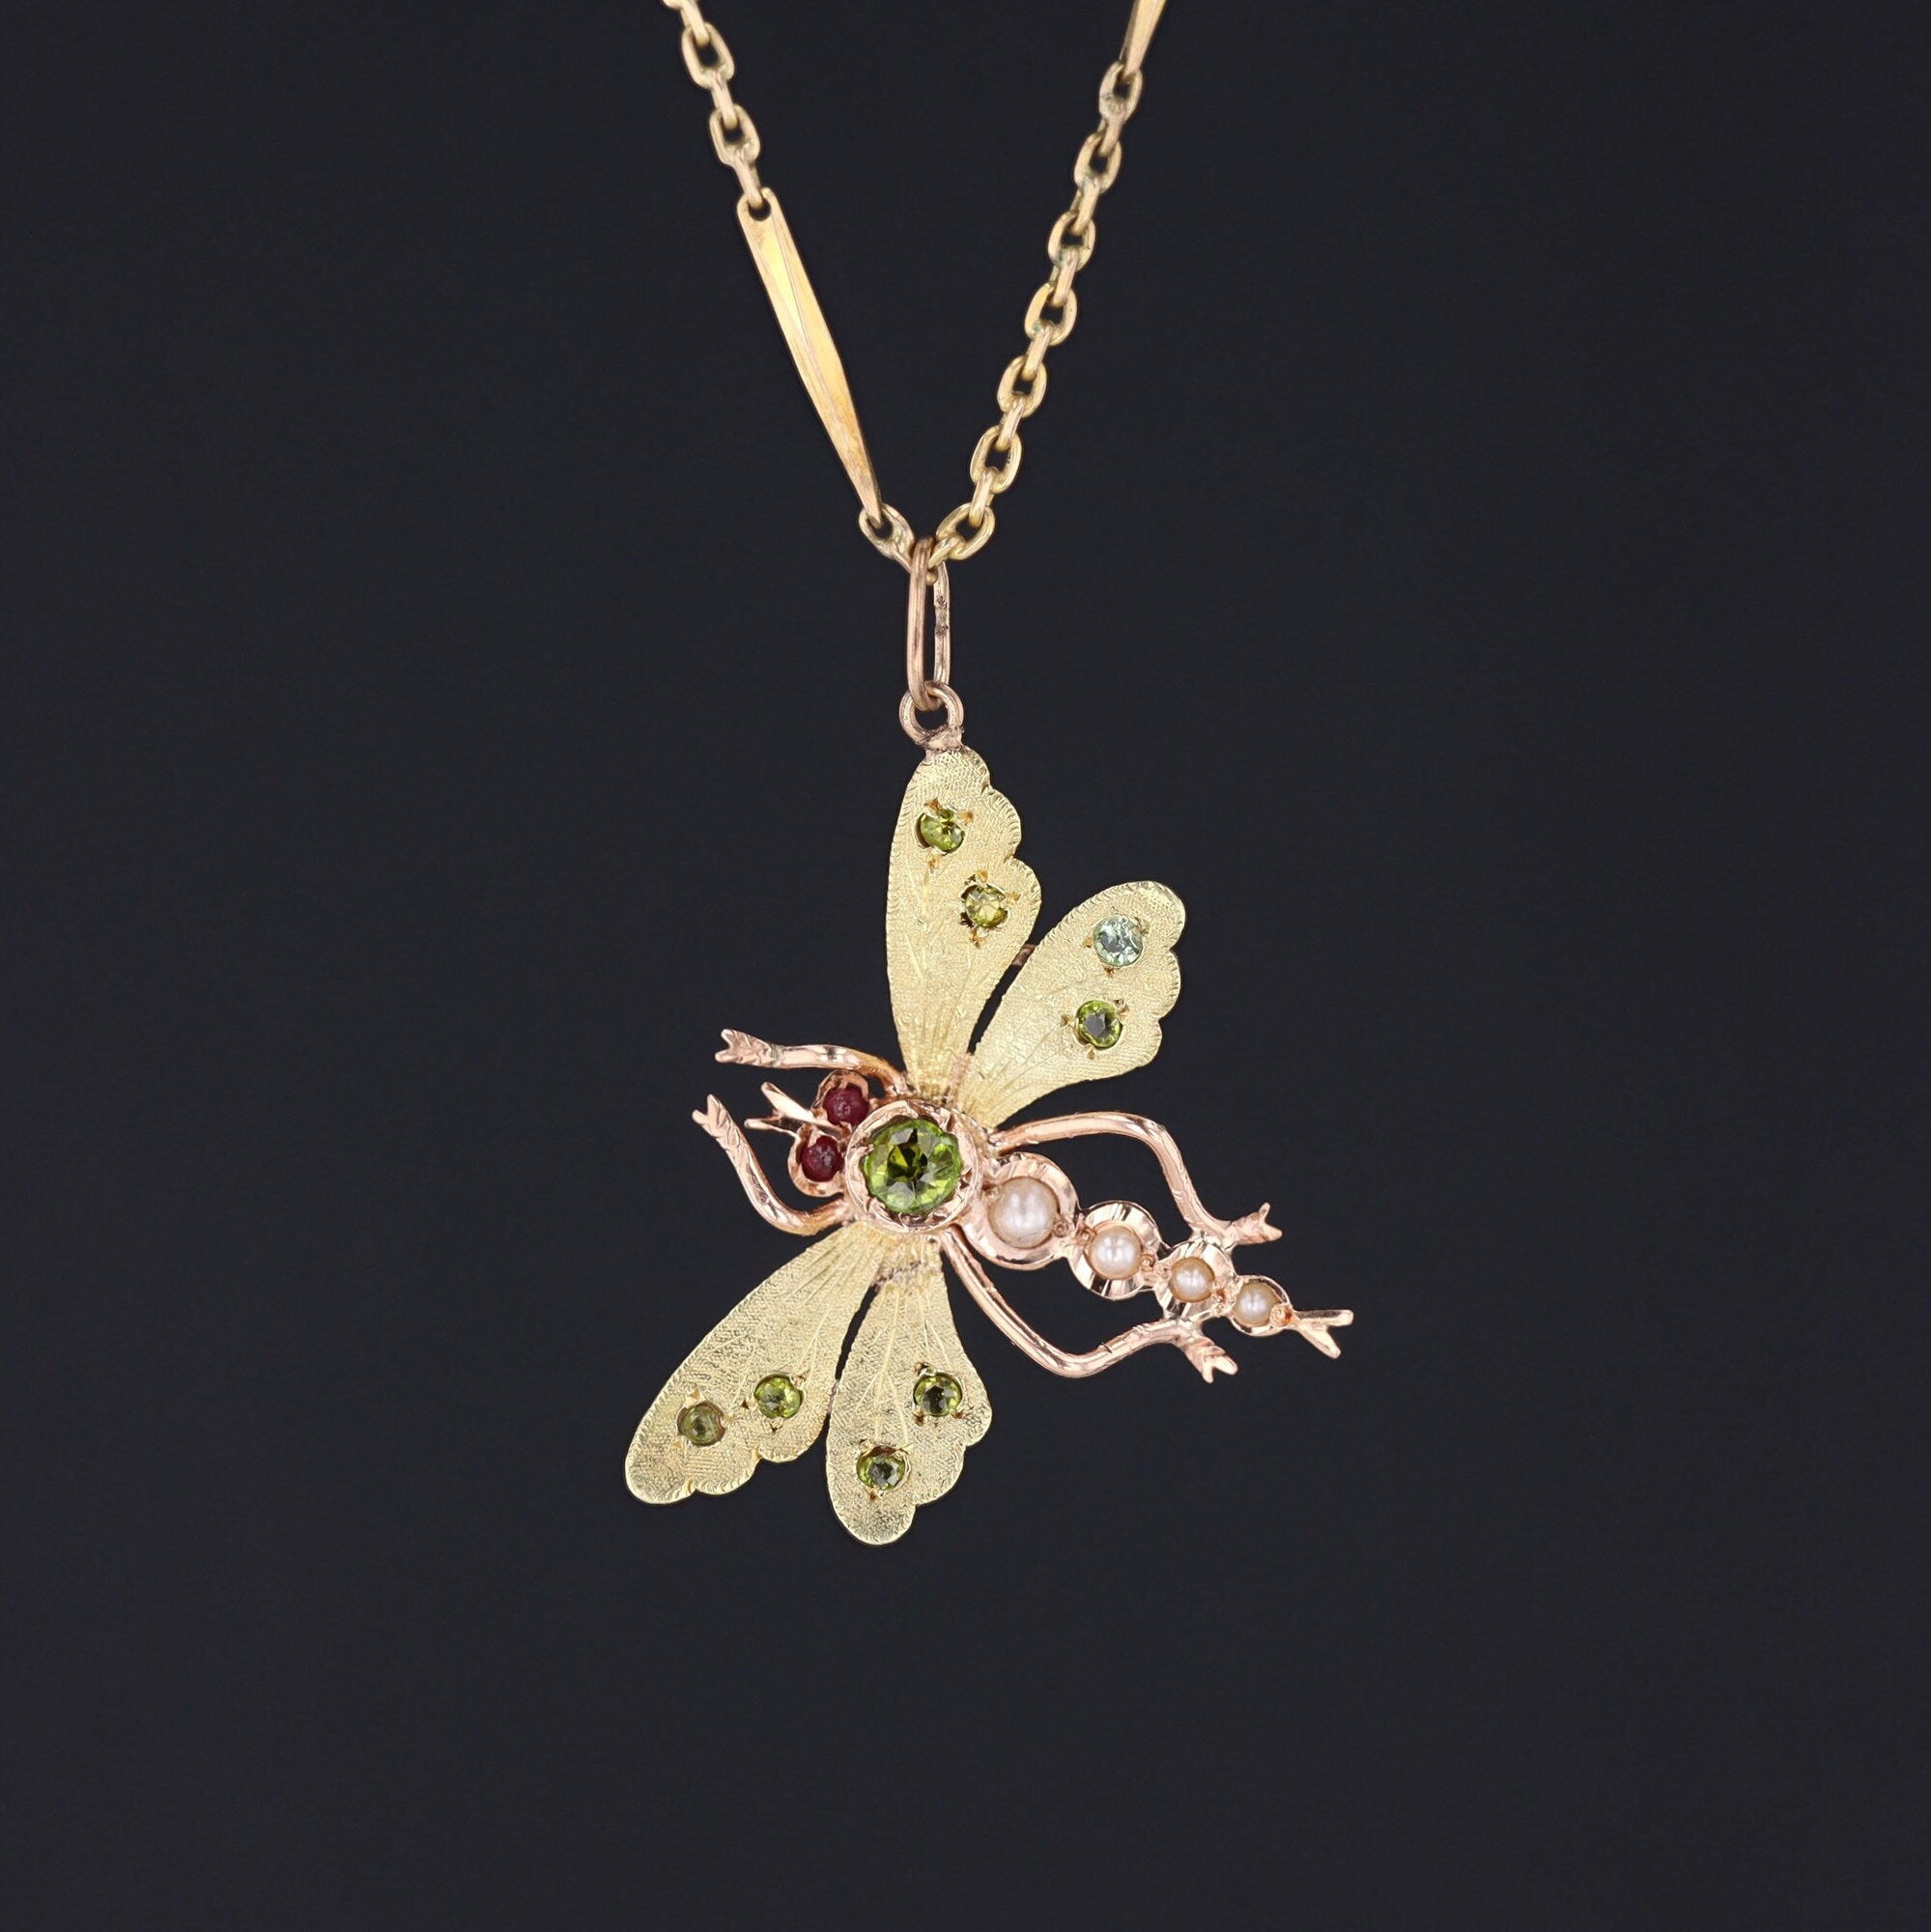 Antique Dragonfly Pendant | 14k Gold & Gemstone Dragonfly on Optional 14k Chain 